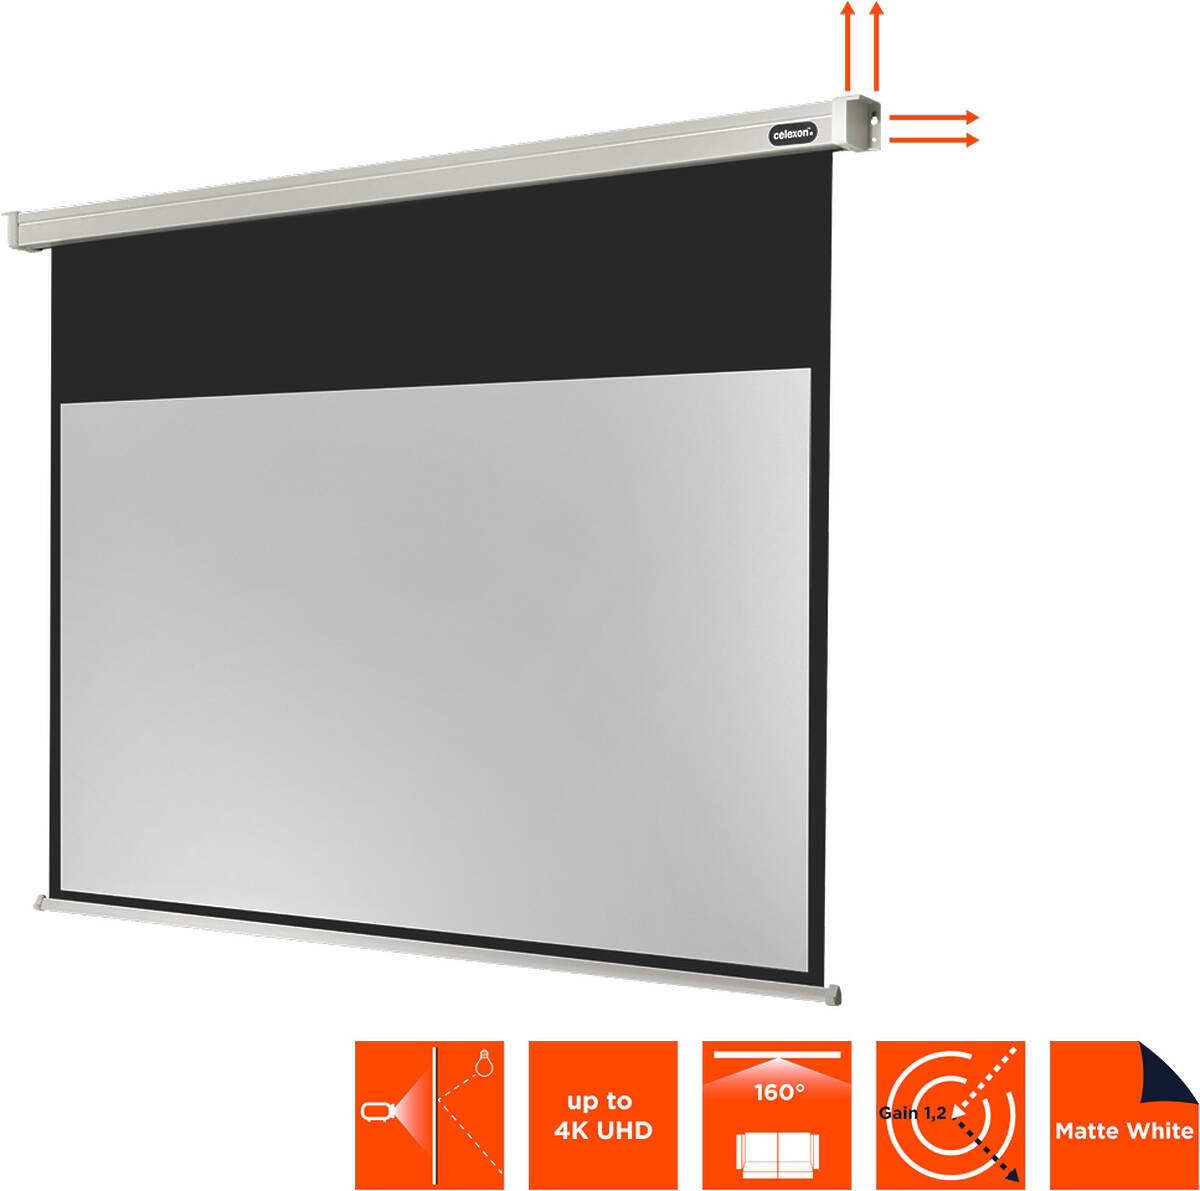 Celexon EP/174X98 79" (2.00m)
 16:9 aspect ratio projection screen product image. Click to enlarge.